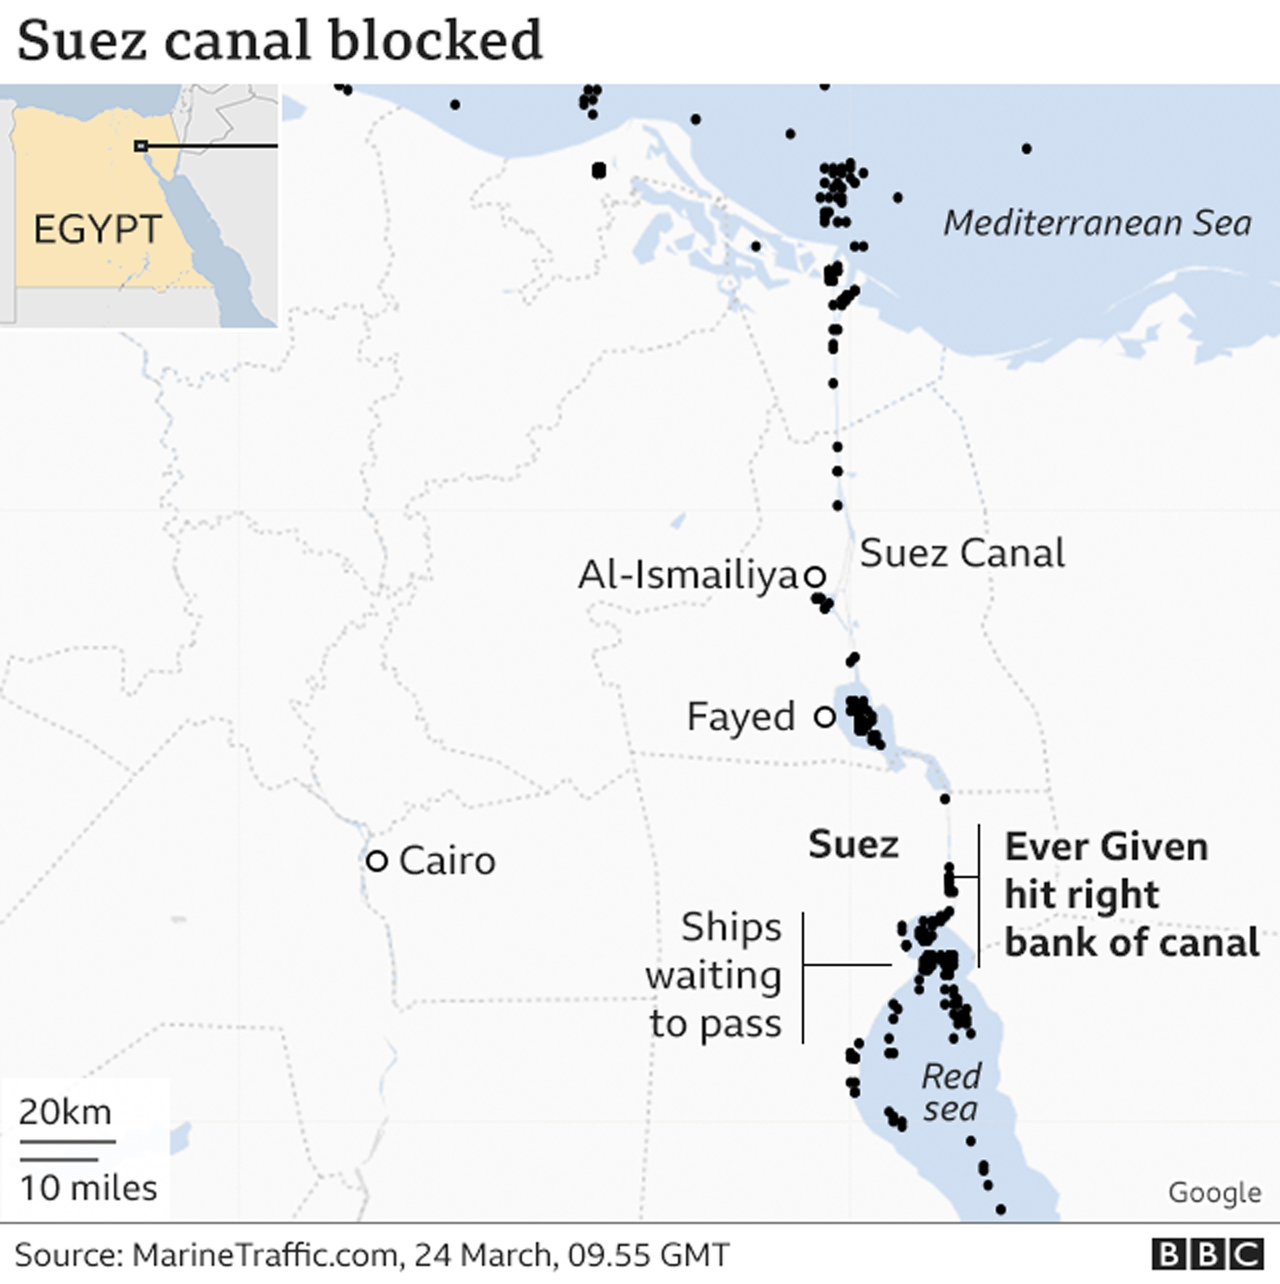 Graphic showing the blockage in the Suez Canal